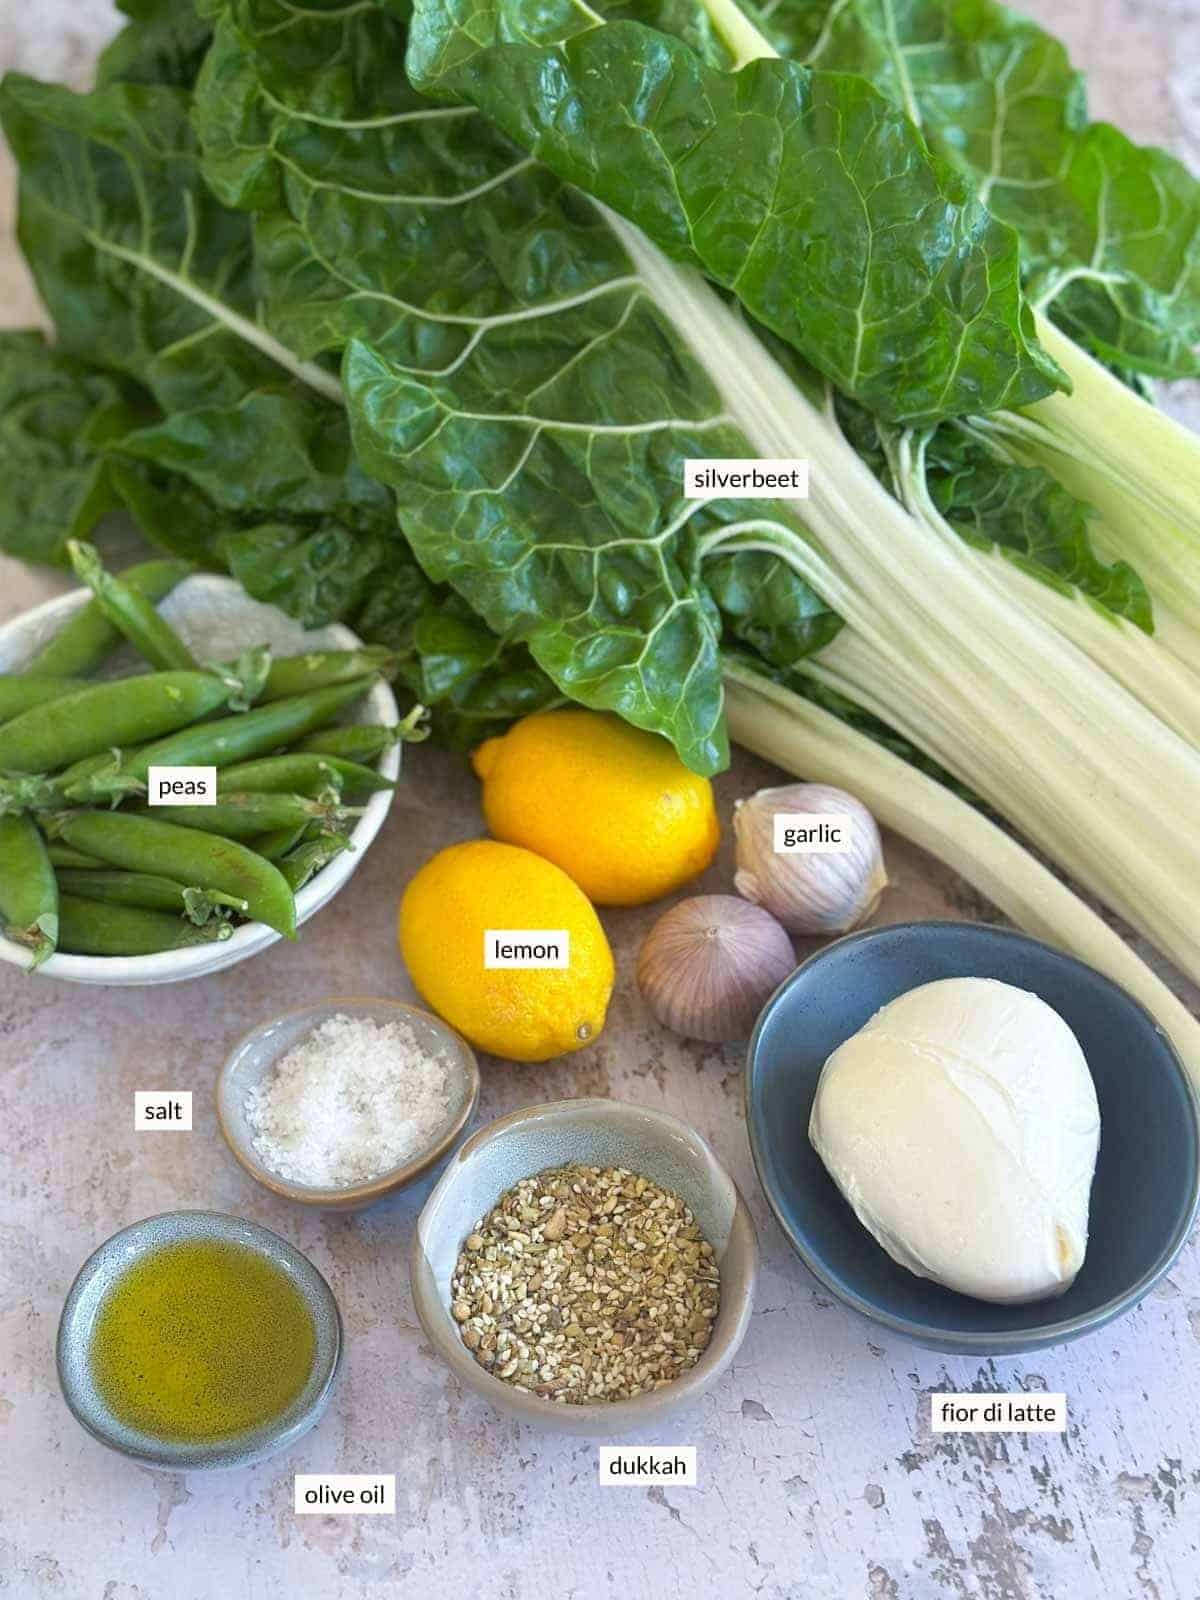 Individually labelled ingredients for Sautéed Silverbeet with Peas